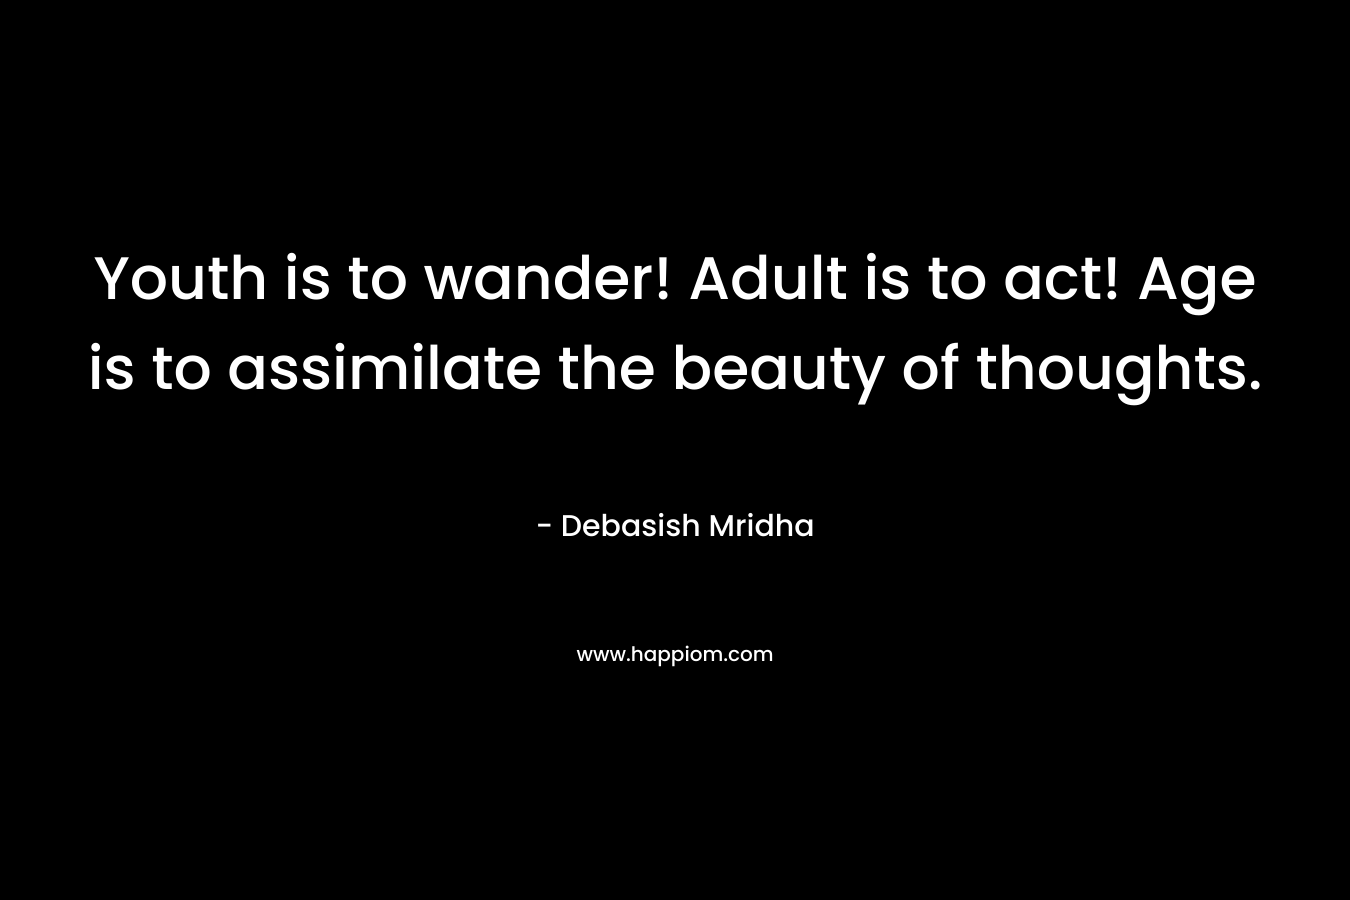 Youth is to wander! Adult is to act! Age is to assimilate the beauty of thoughts.